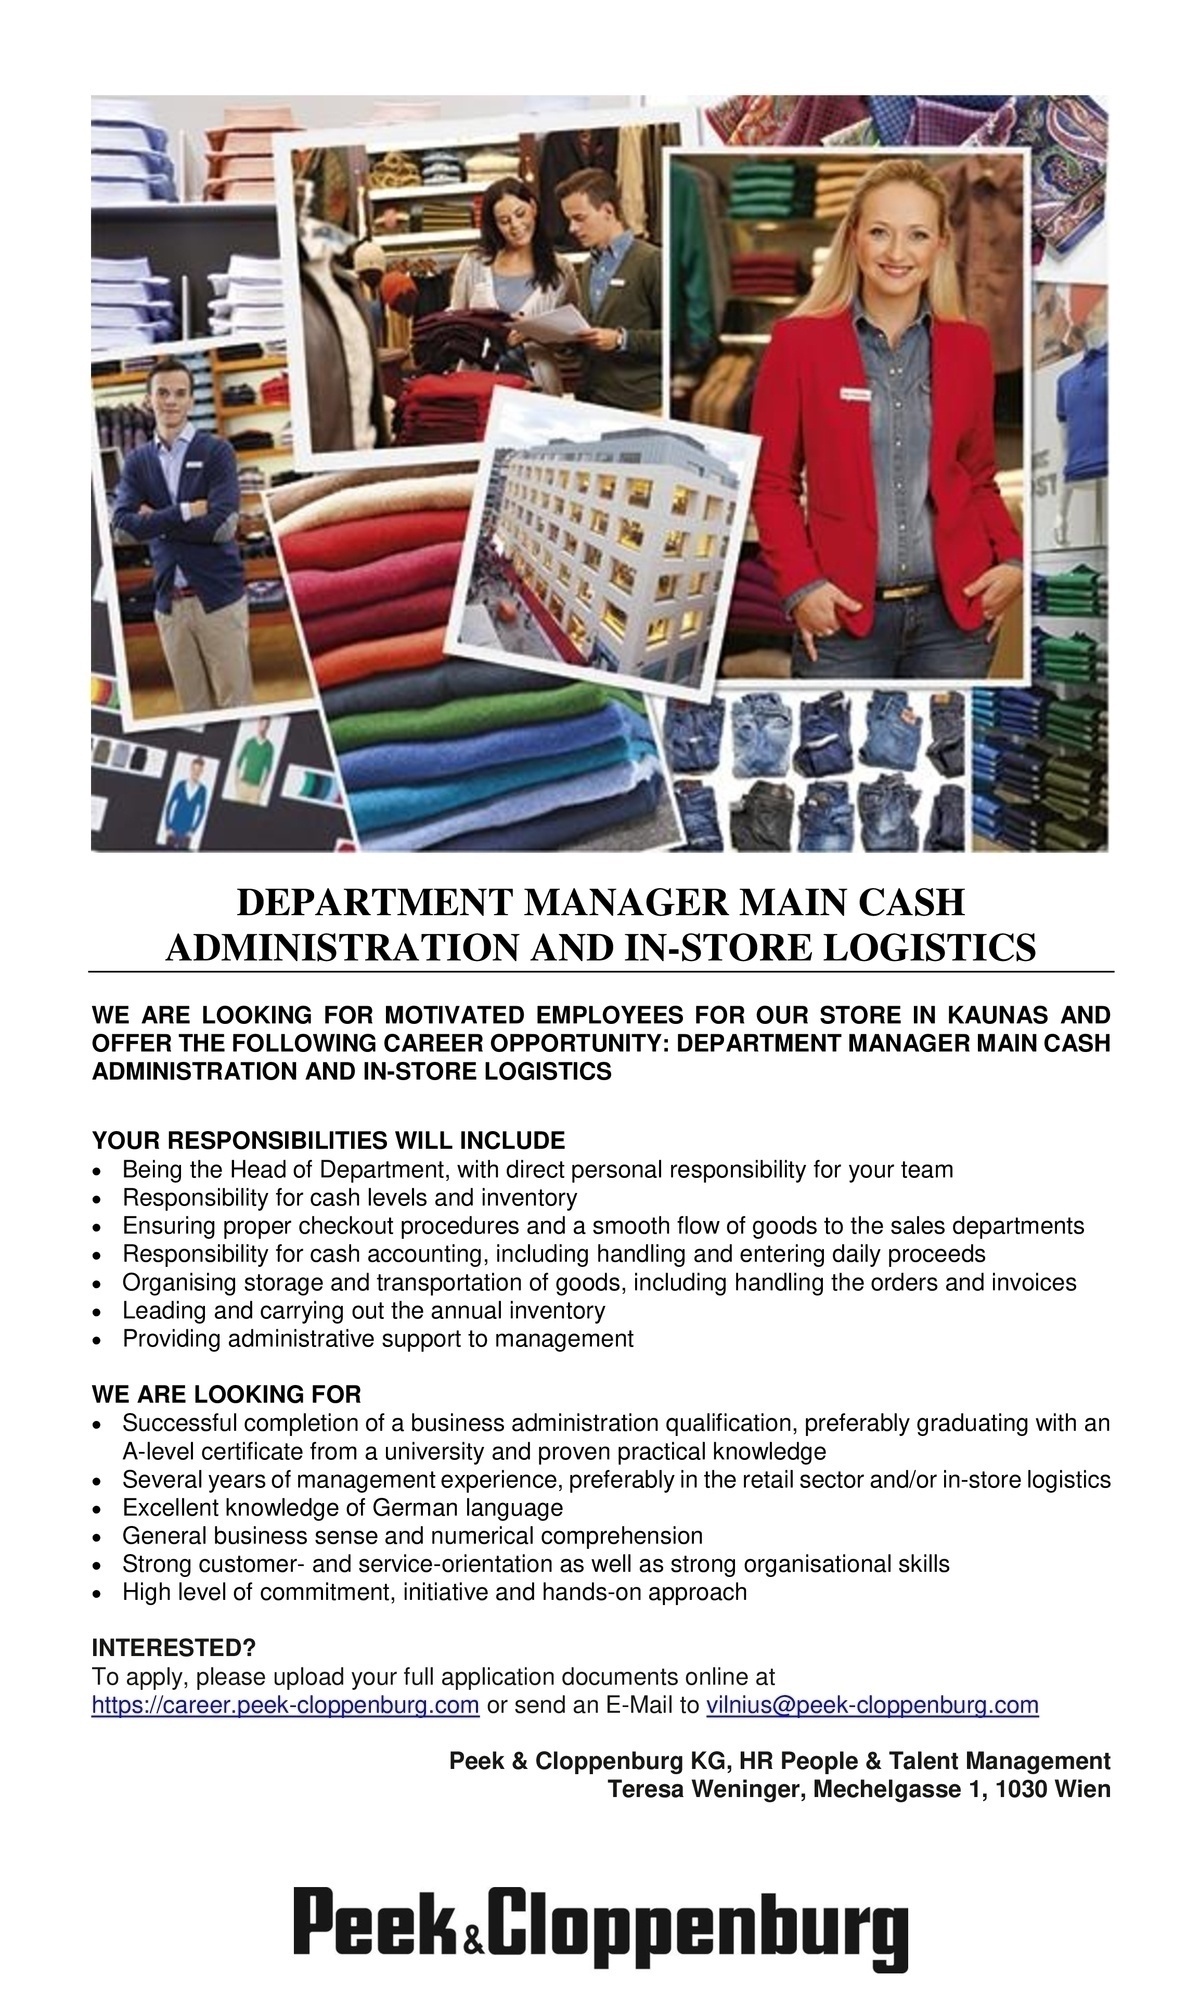 Peek&Cloppenburg, UAB Department manager main cash administration and in-store logistics